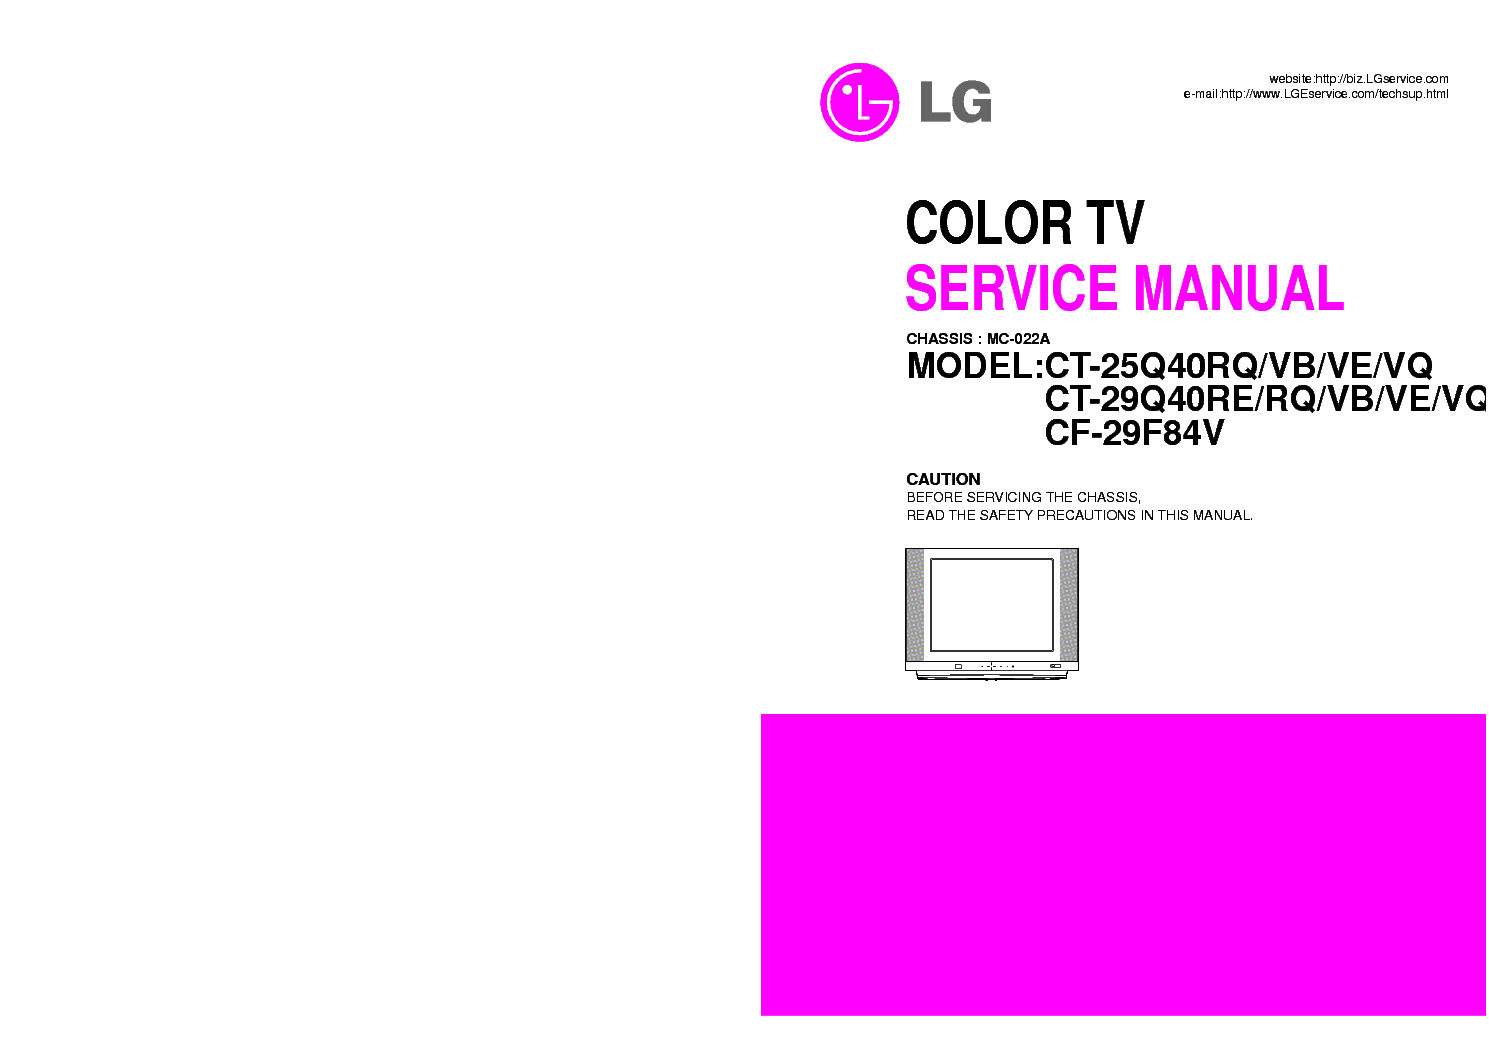 LG CT-25Q40XX, CT-29Q40XX, CF-29F84V CHASSIS MC-022A SERVICE MANUAL service manual (1st page)